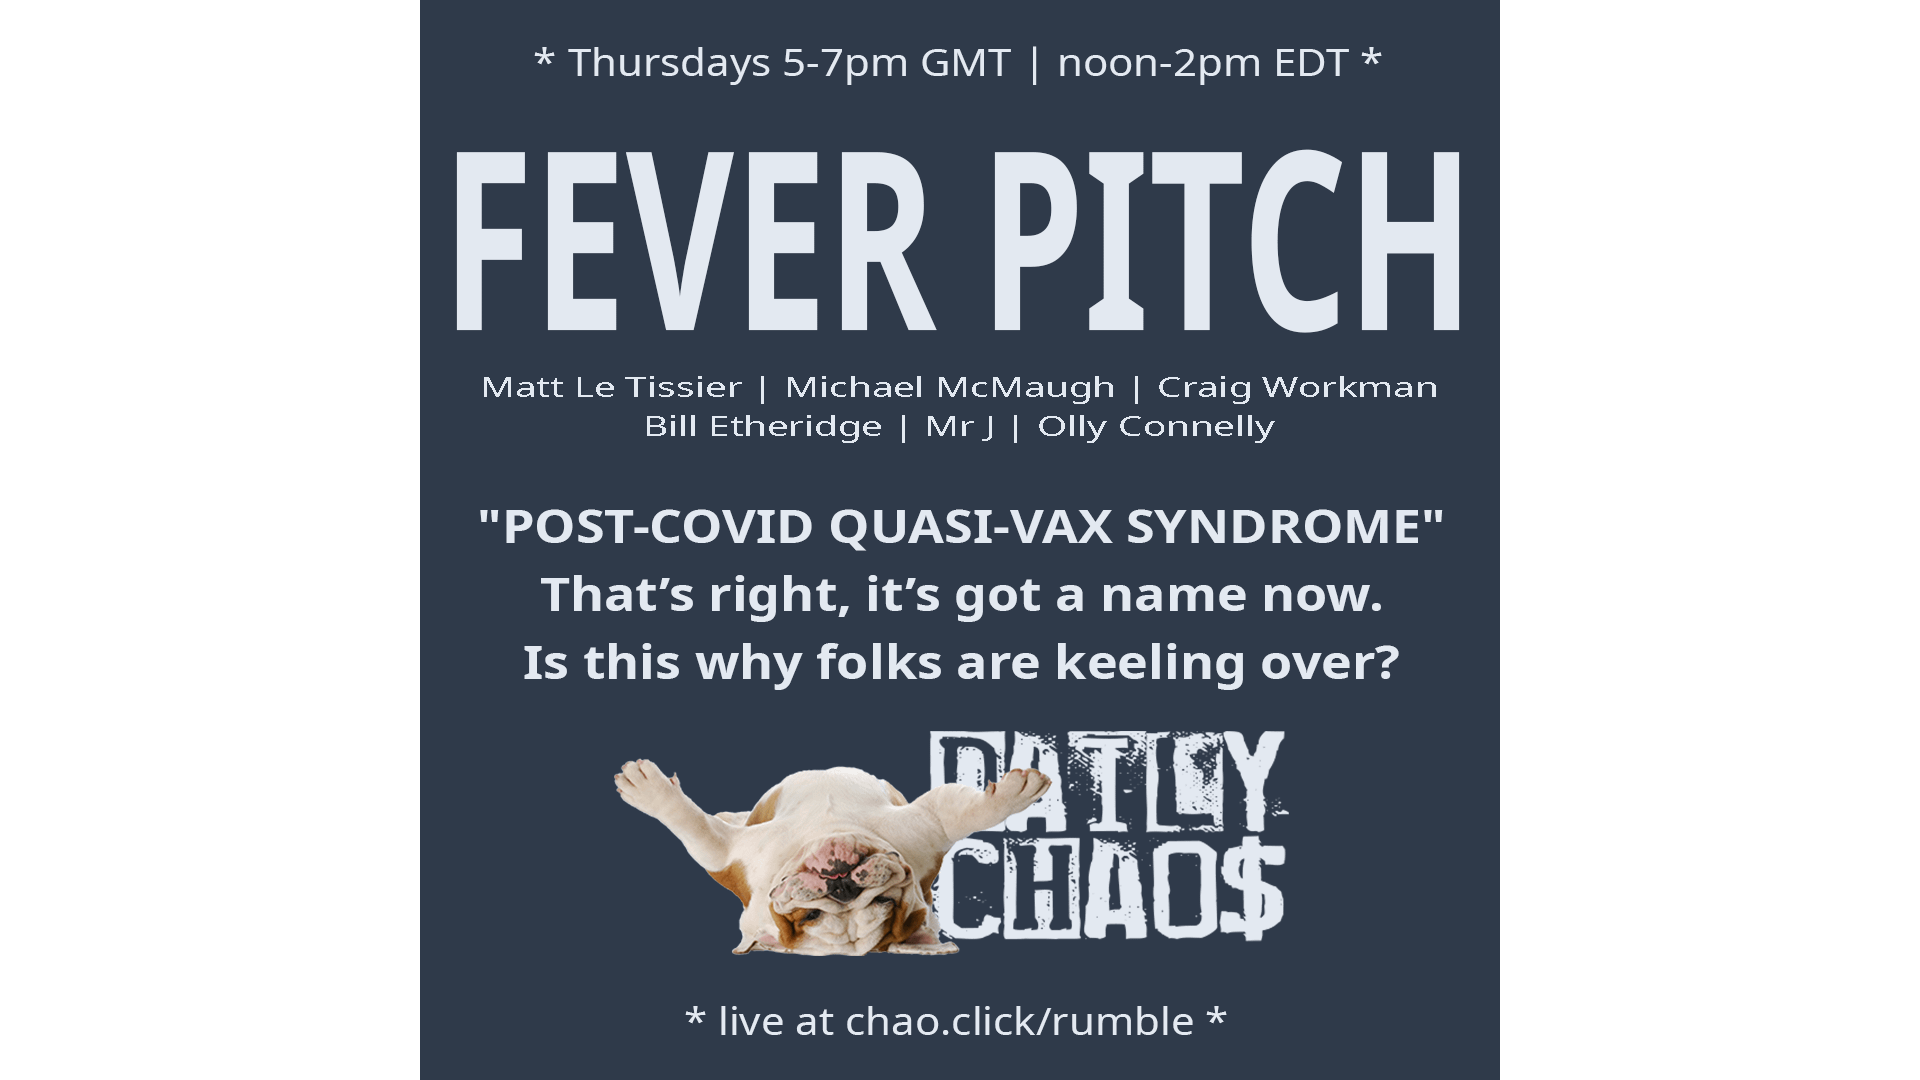 FEVER PITCH (promo) ~ Daily Chaos